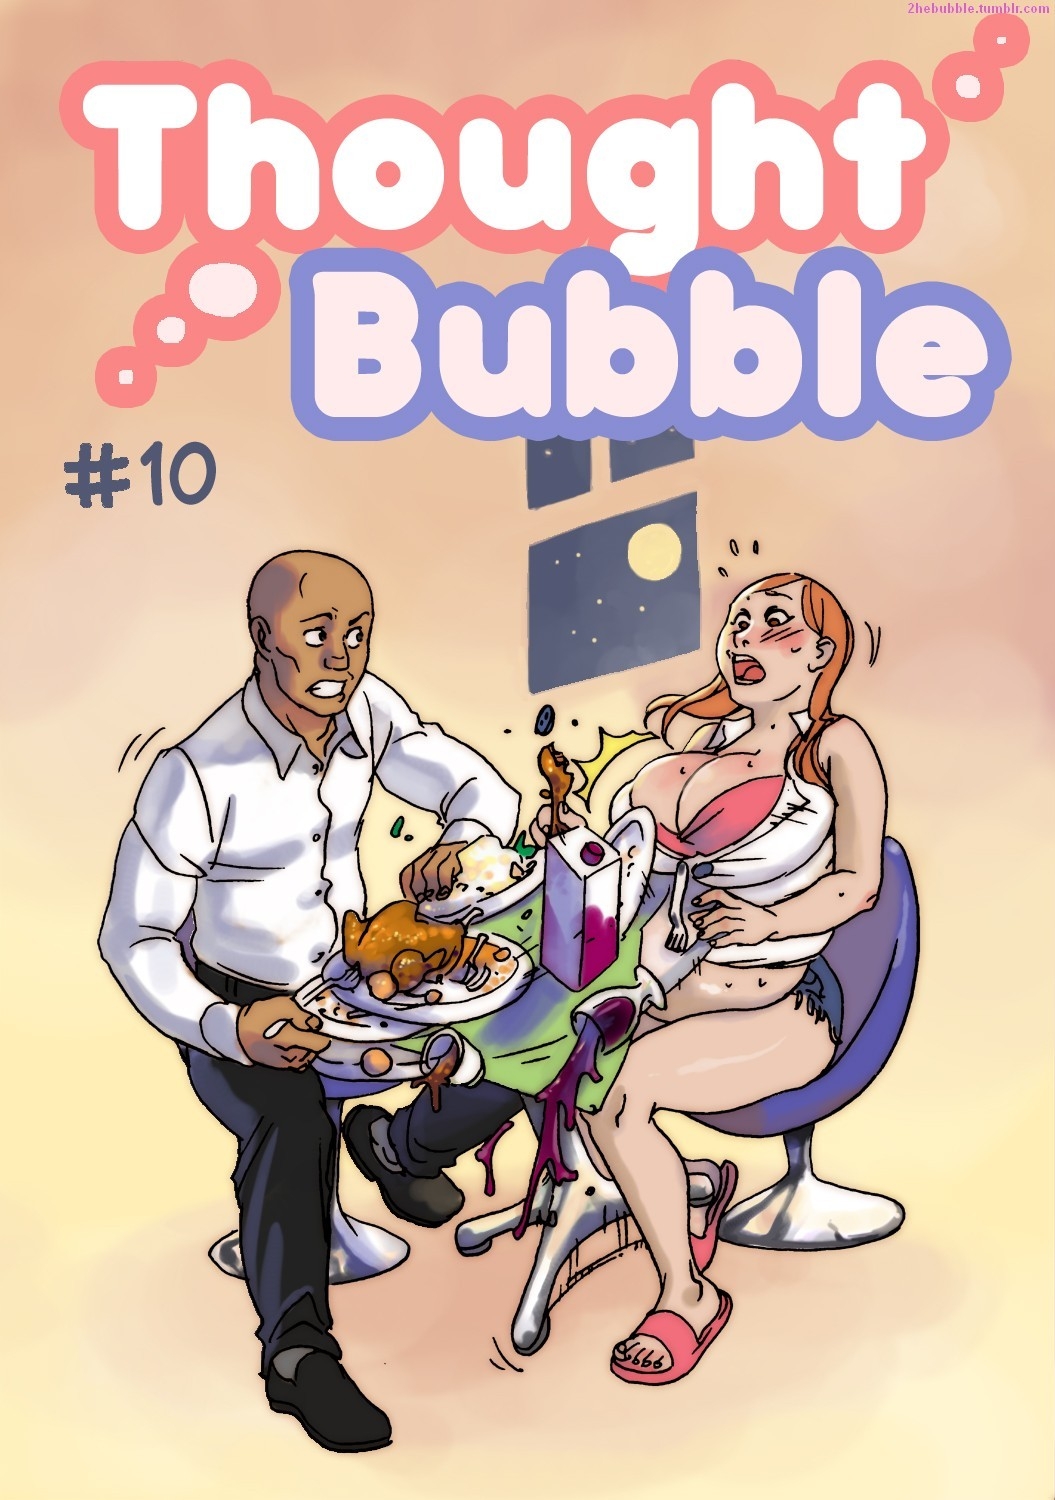 [Sidneymt] Thought Bubble #10-11 0